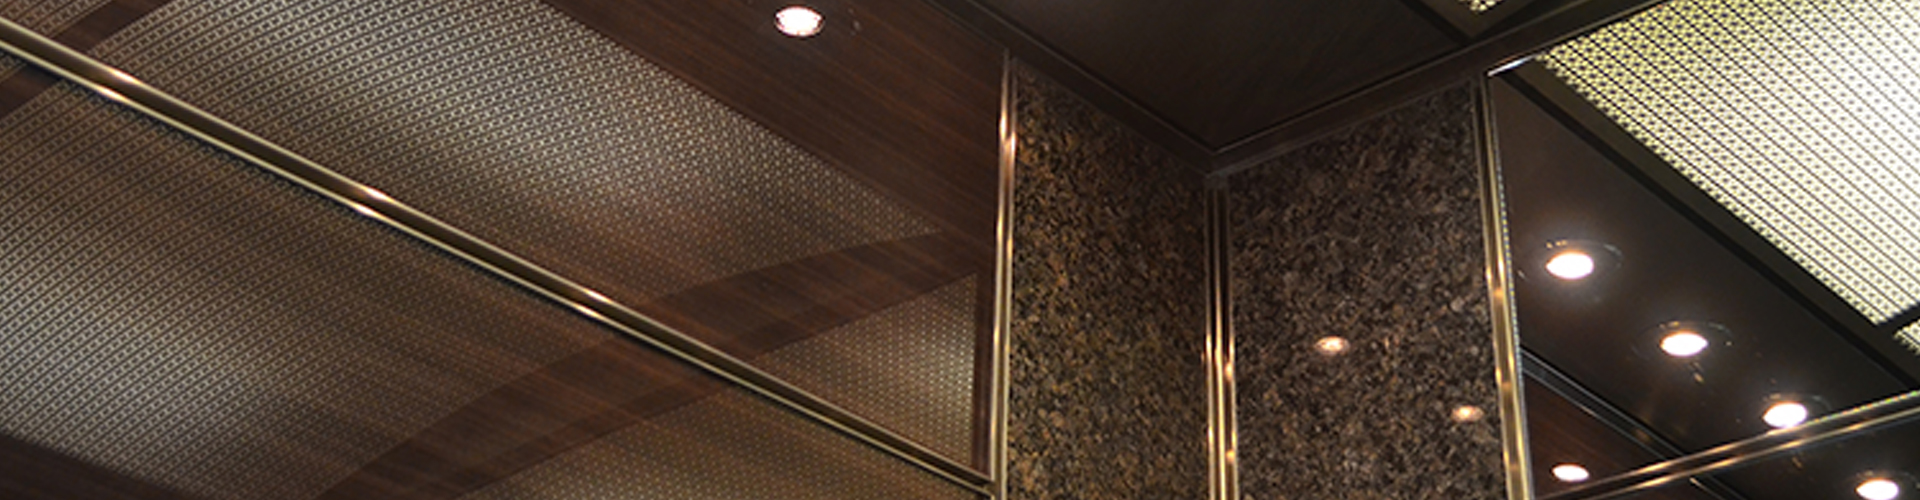 We are one of the top Elevator manufactures in Pakistan with best post installed services